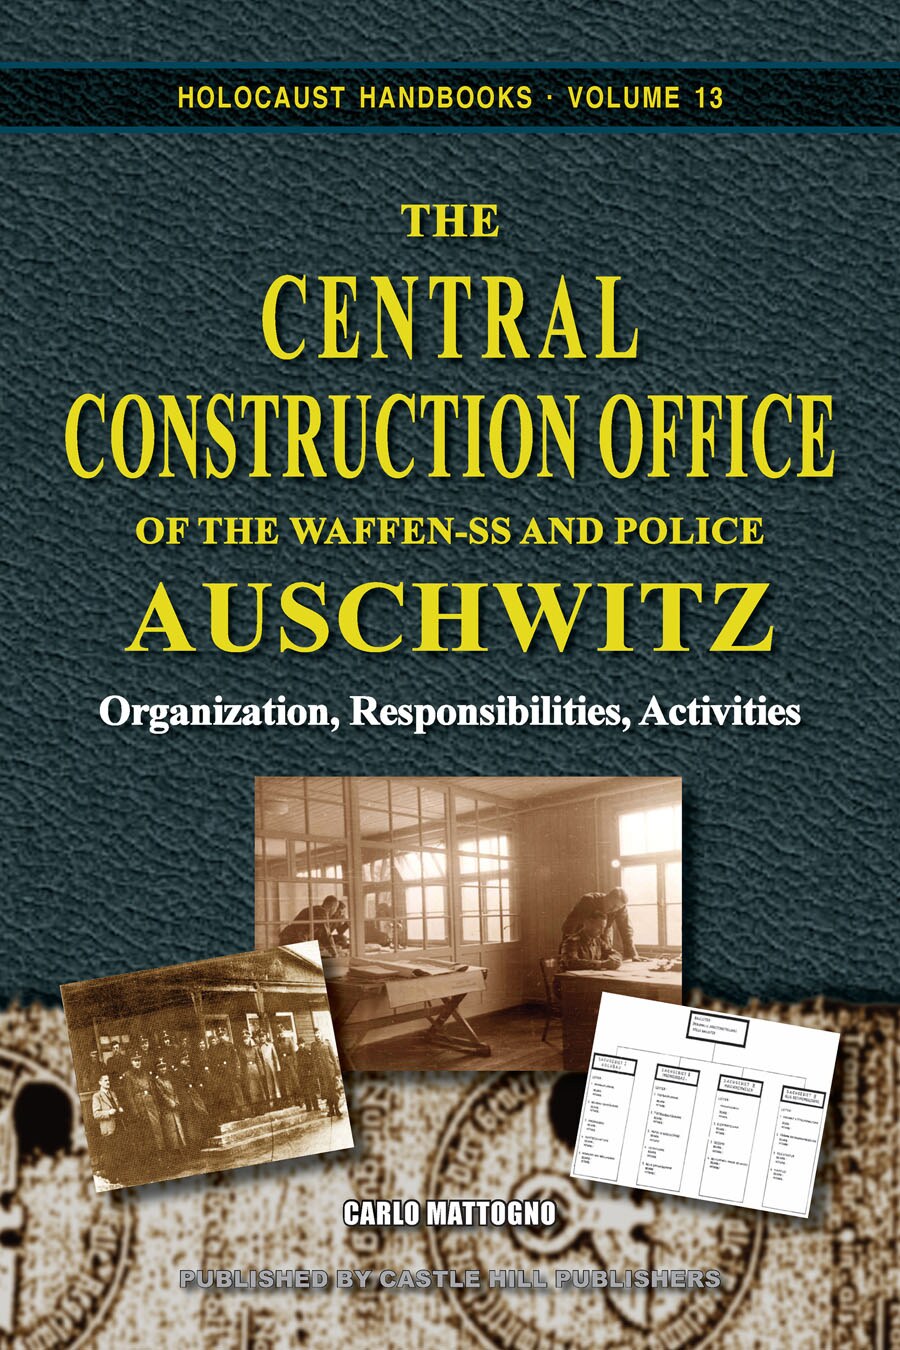 The Central Construction Office of the Waffen-SS and Police Auschwitz: Organization, Responsibilities, Activities